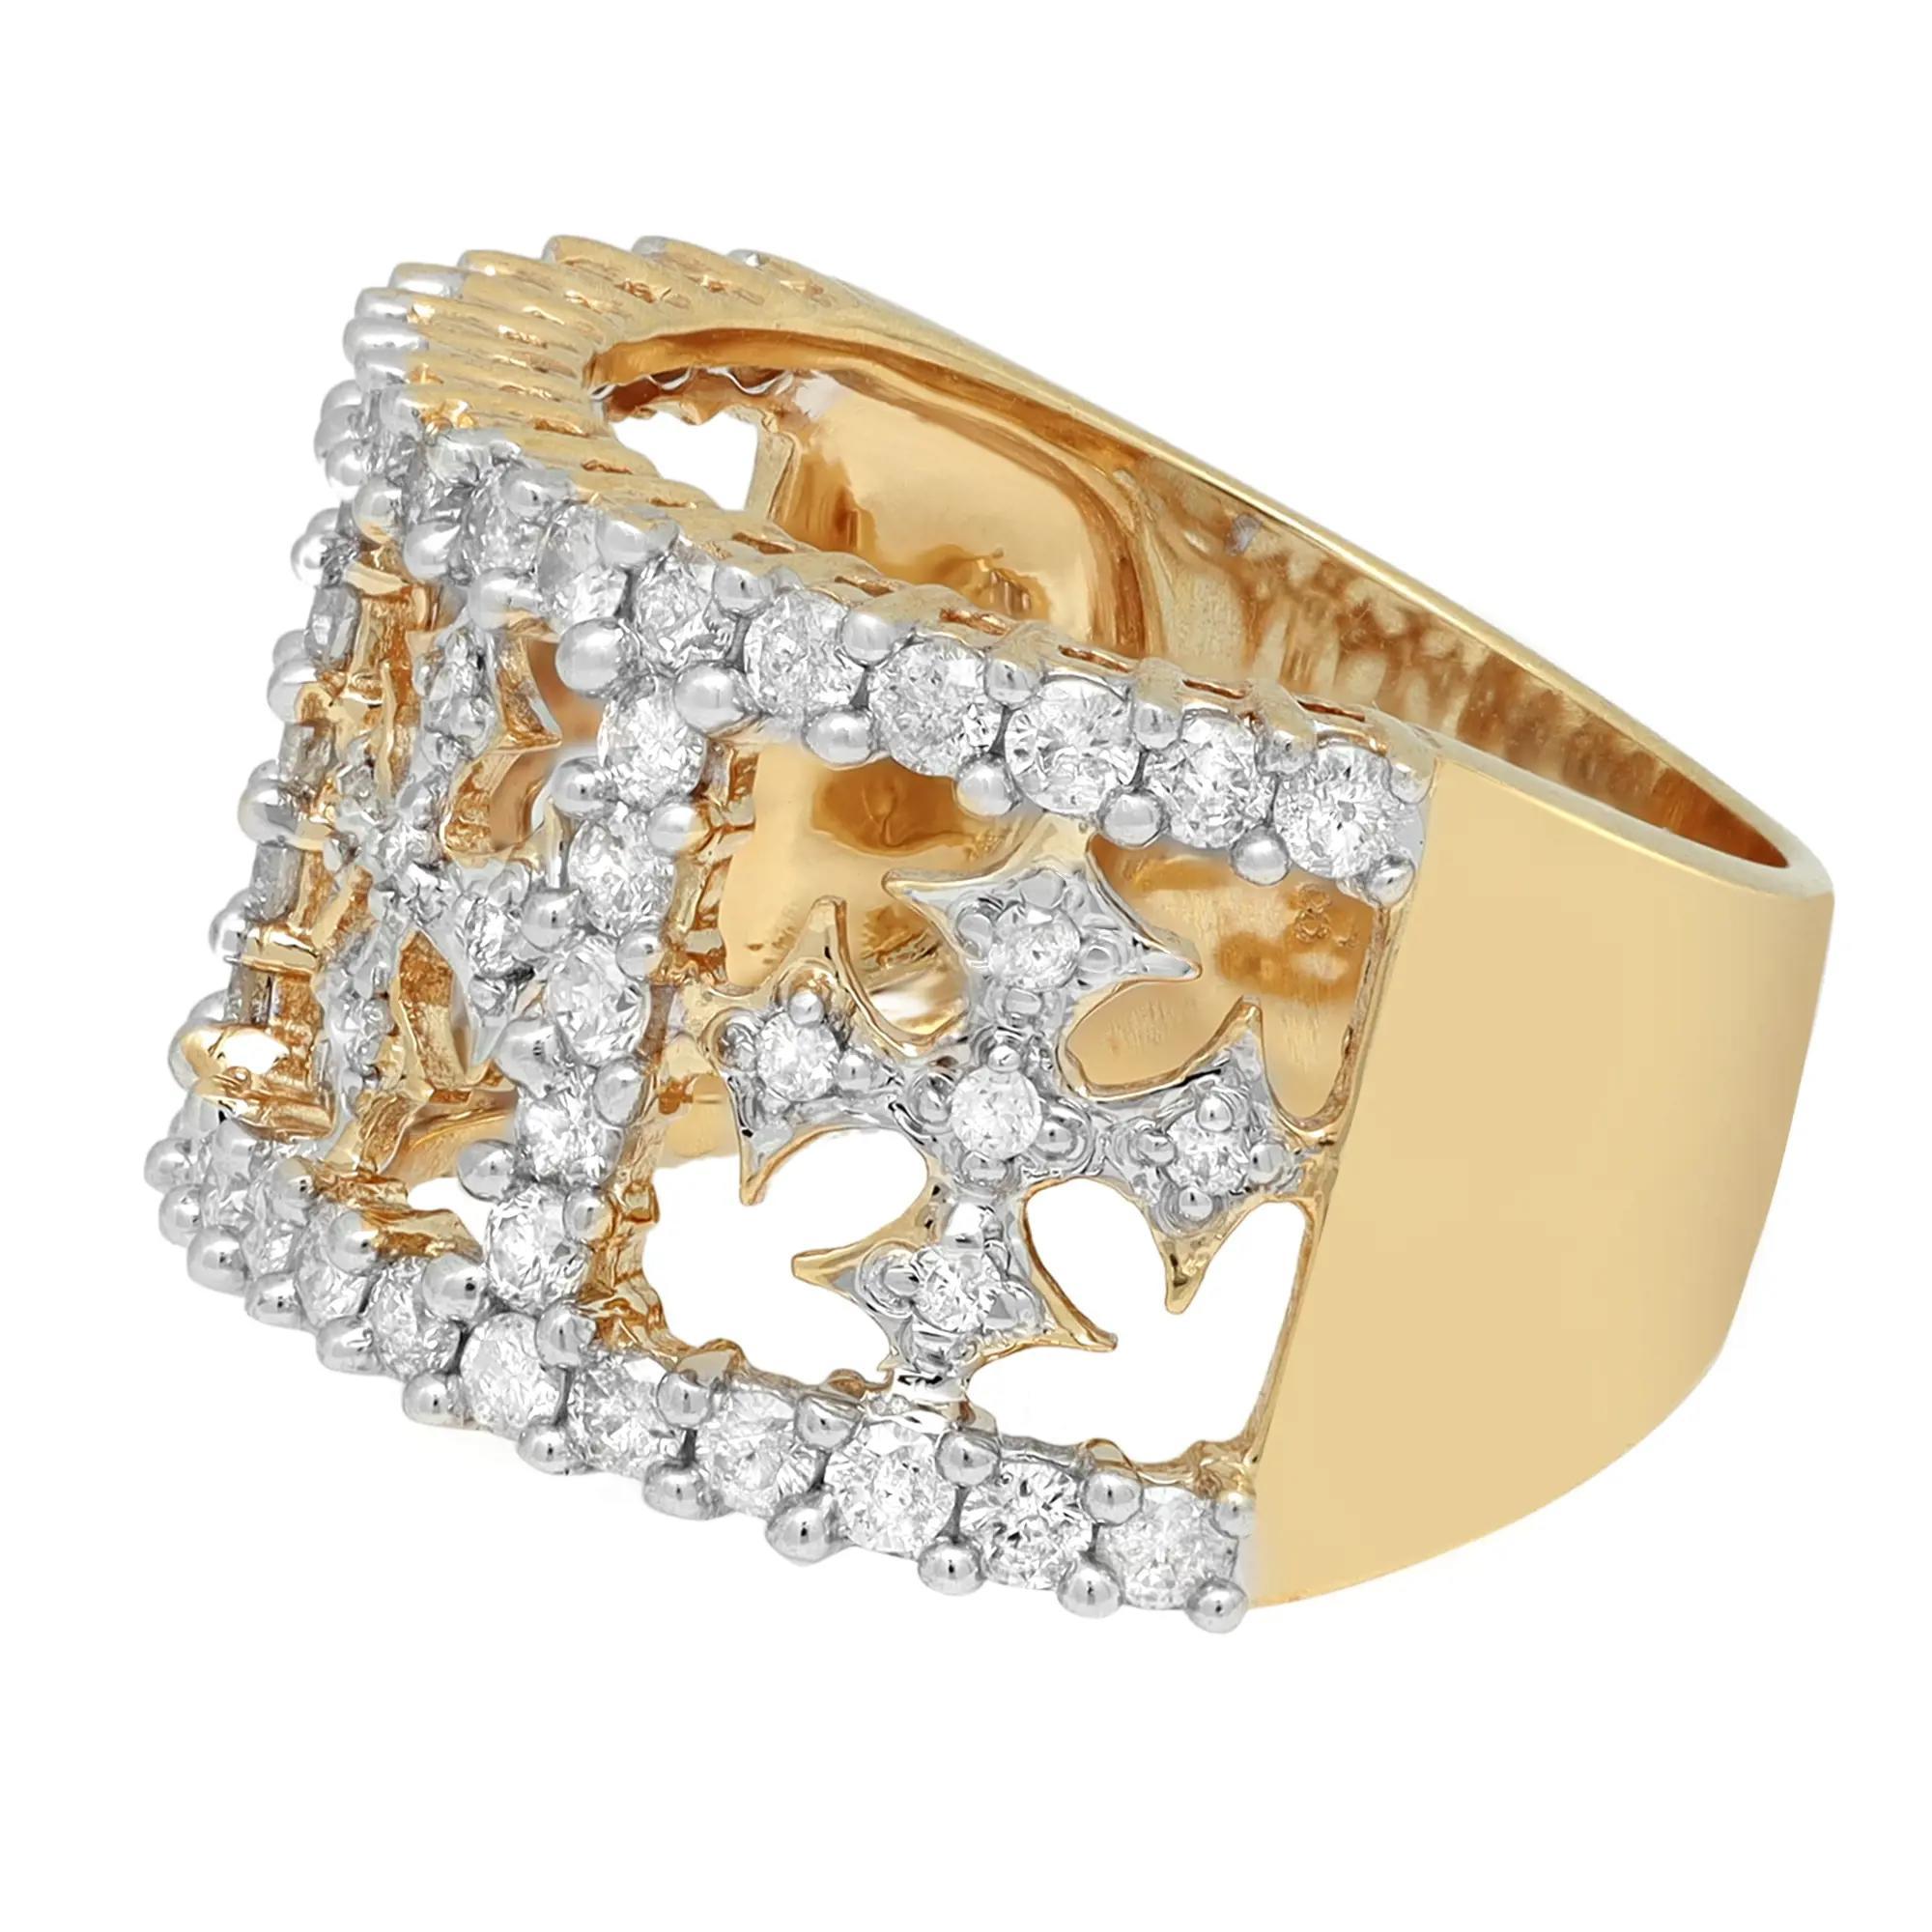 This wide band openwork cross design ring is crafted from rich 14K yellow gold. Set with shimmering round cut diamonds, totaling 1.15 carats. The diamond color is I with SI-I clarity. Ring size 7.5. Width of the ring is 13 mm. Total weight: 8.53